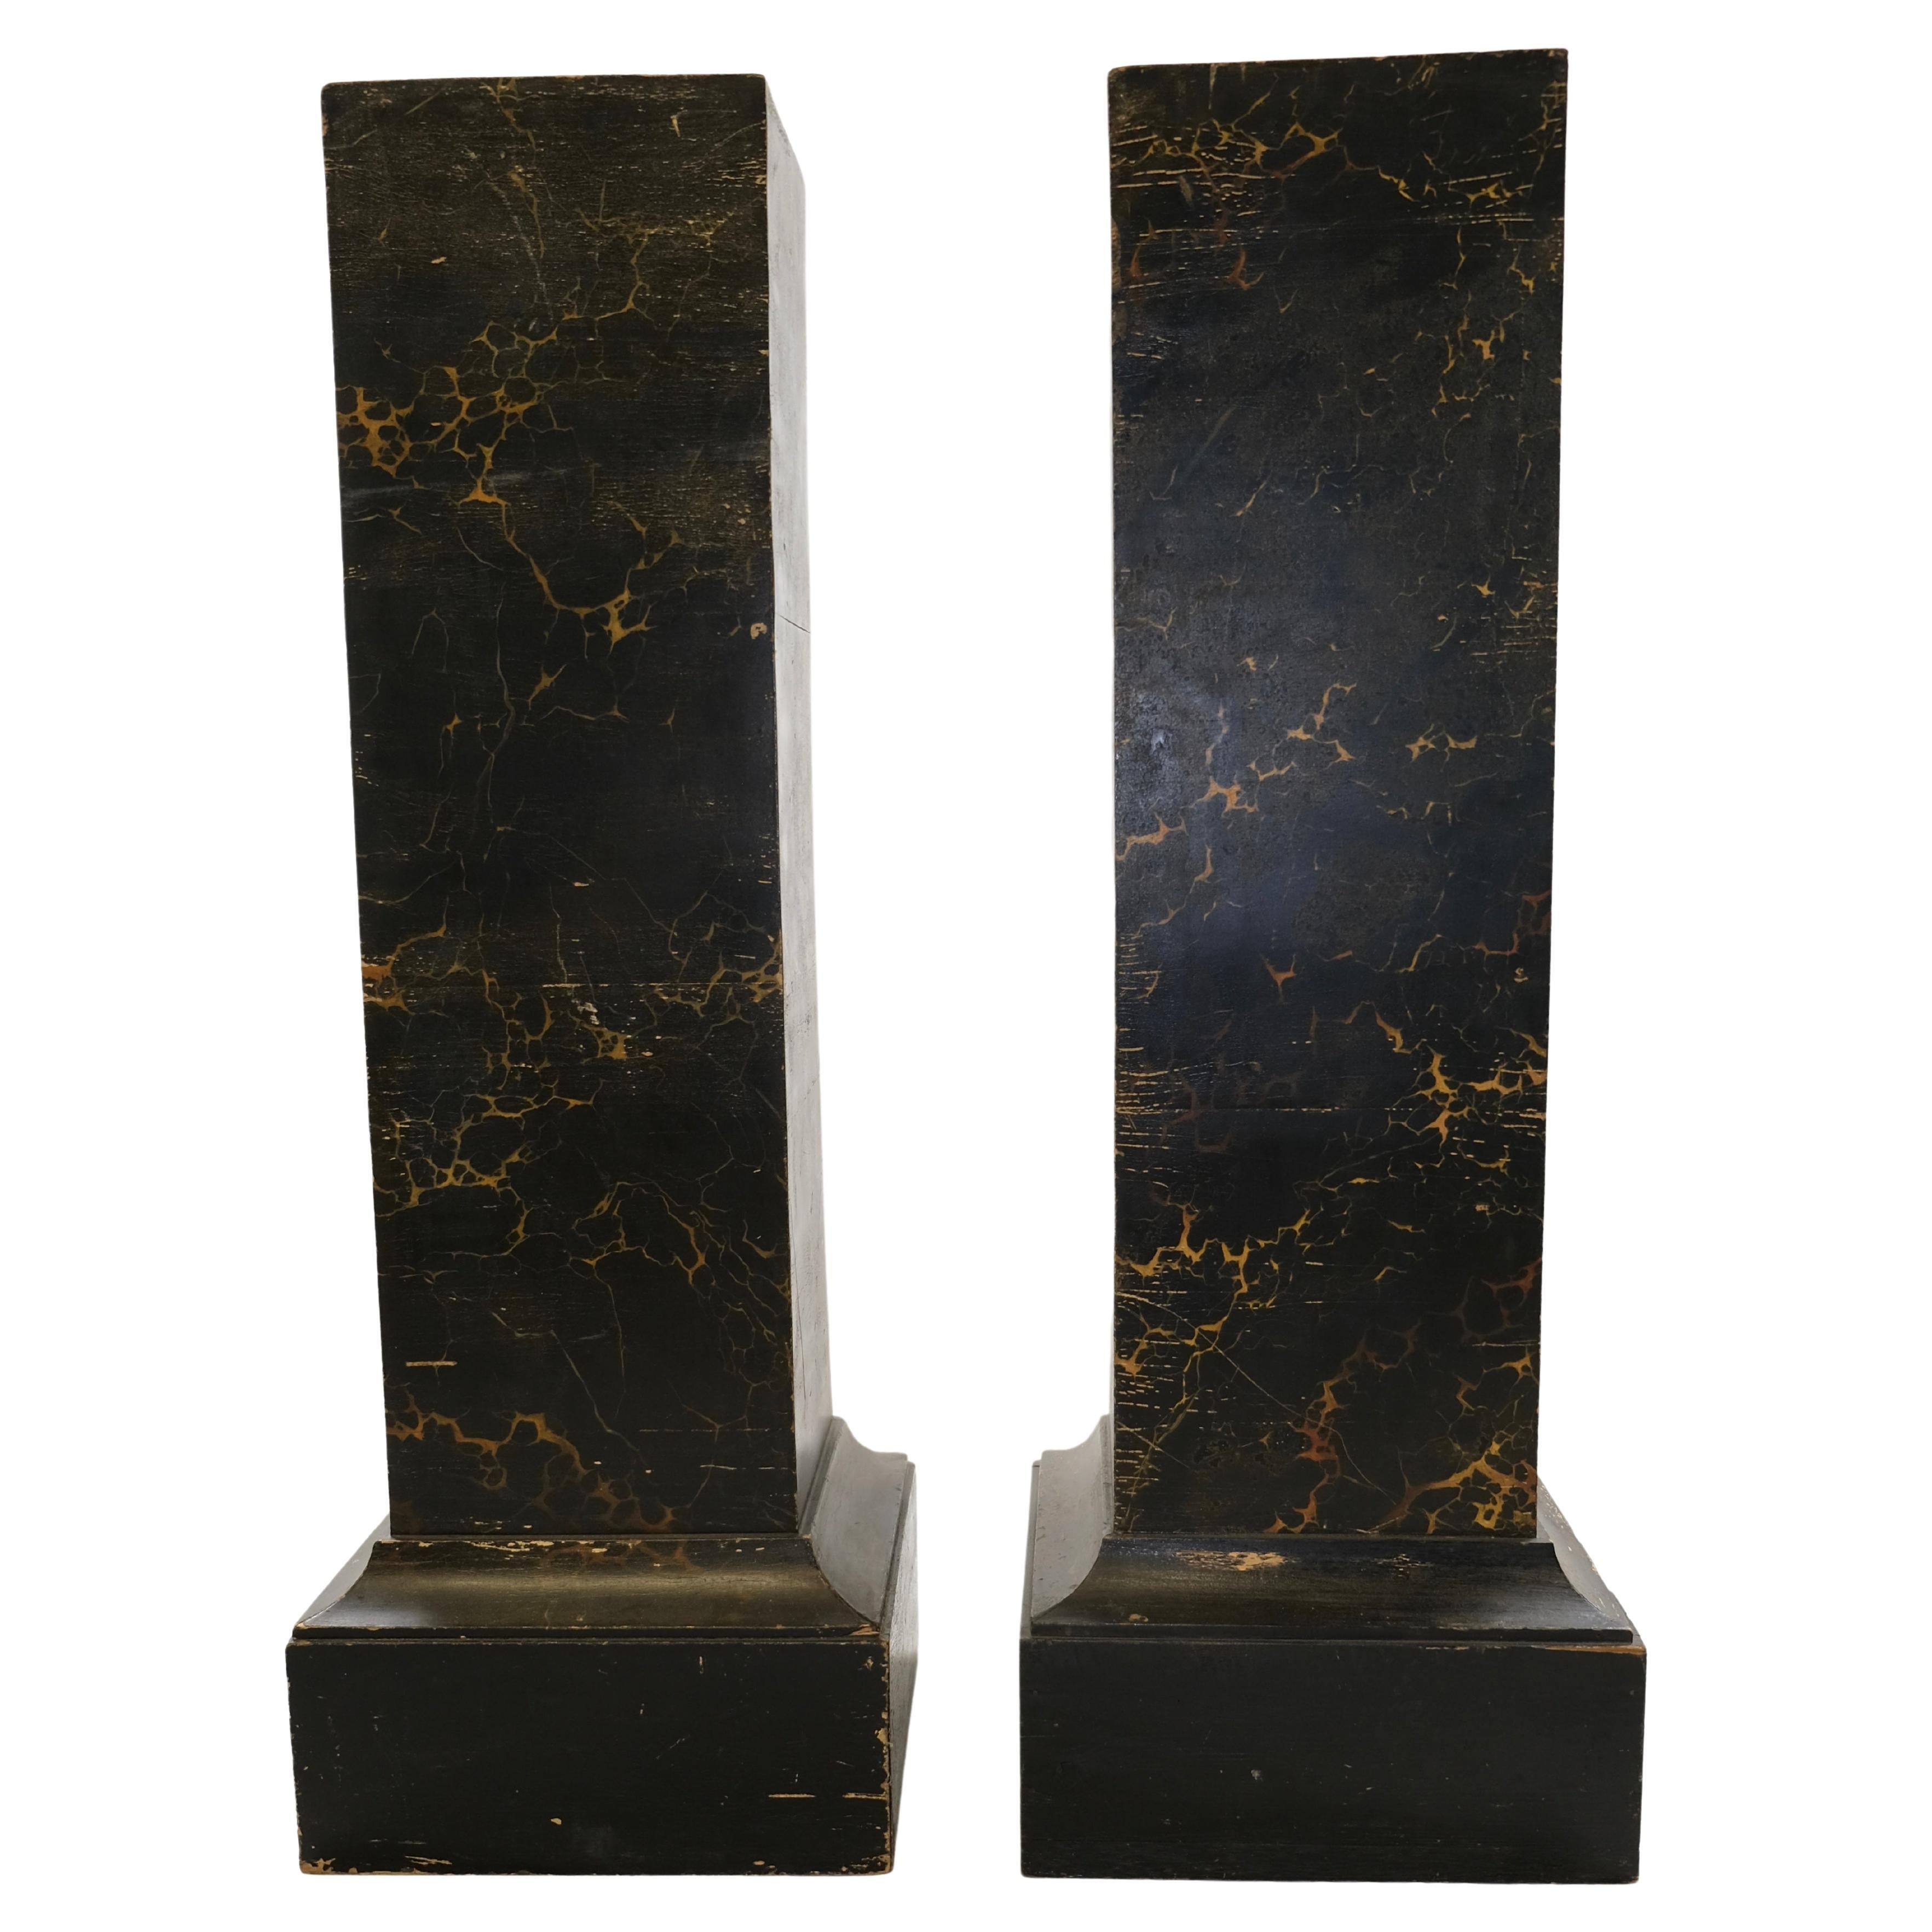 Pair of square Pillars, original Marble-Imitation painted  Wood. Early 19th C.